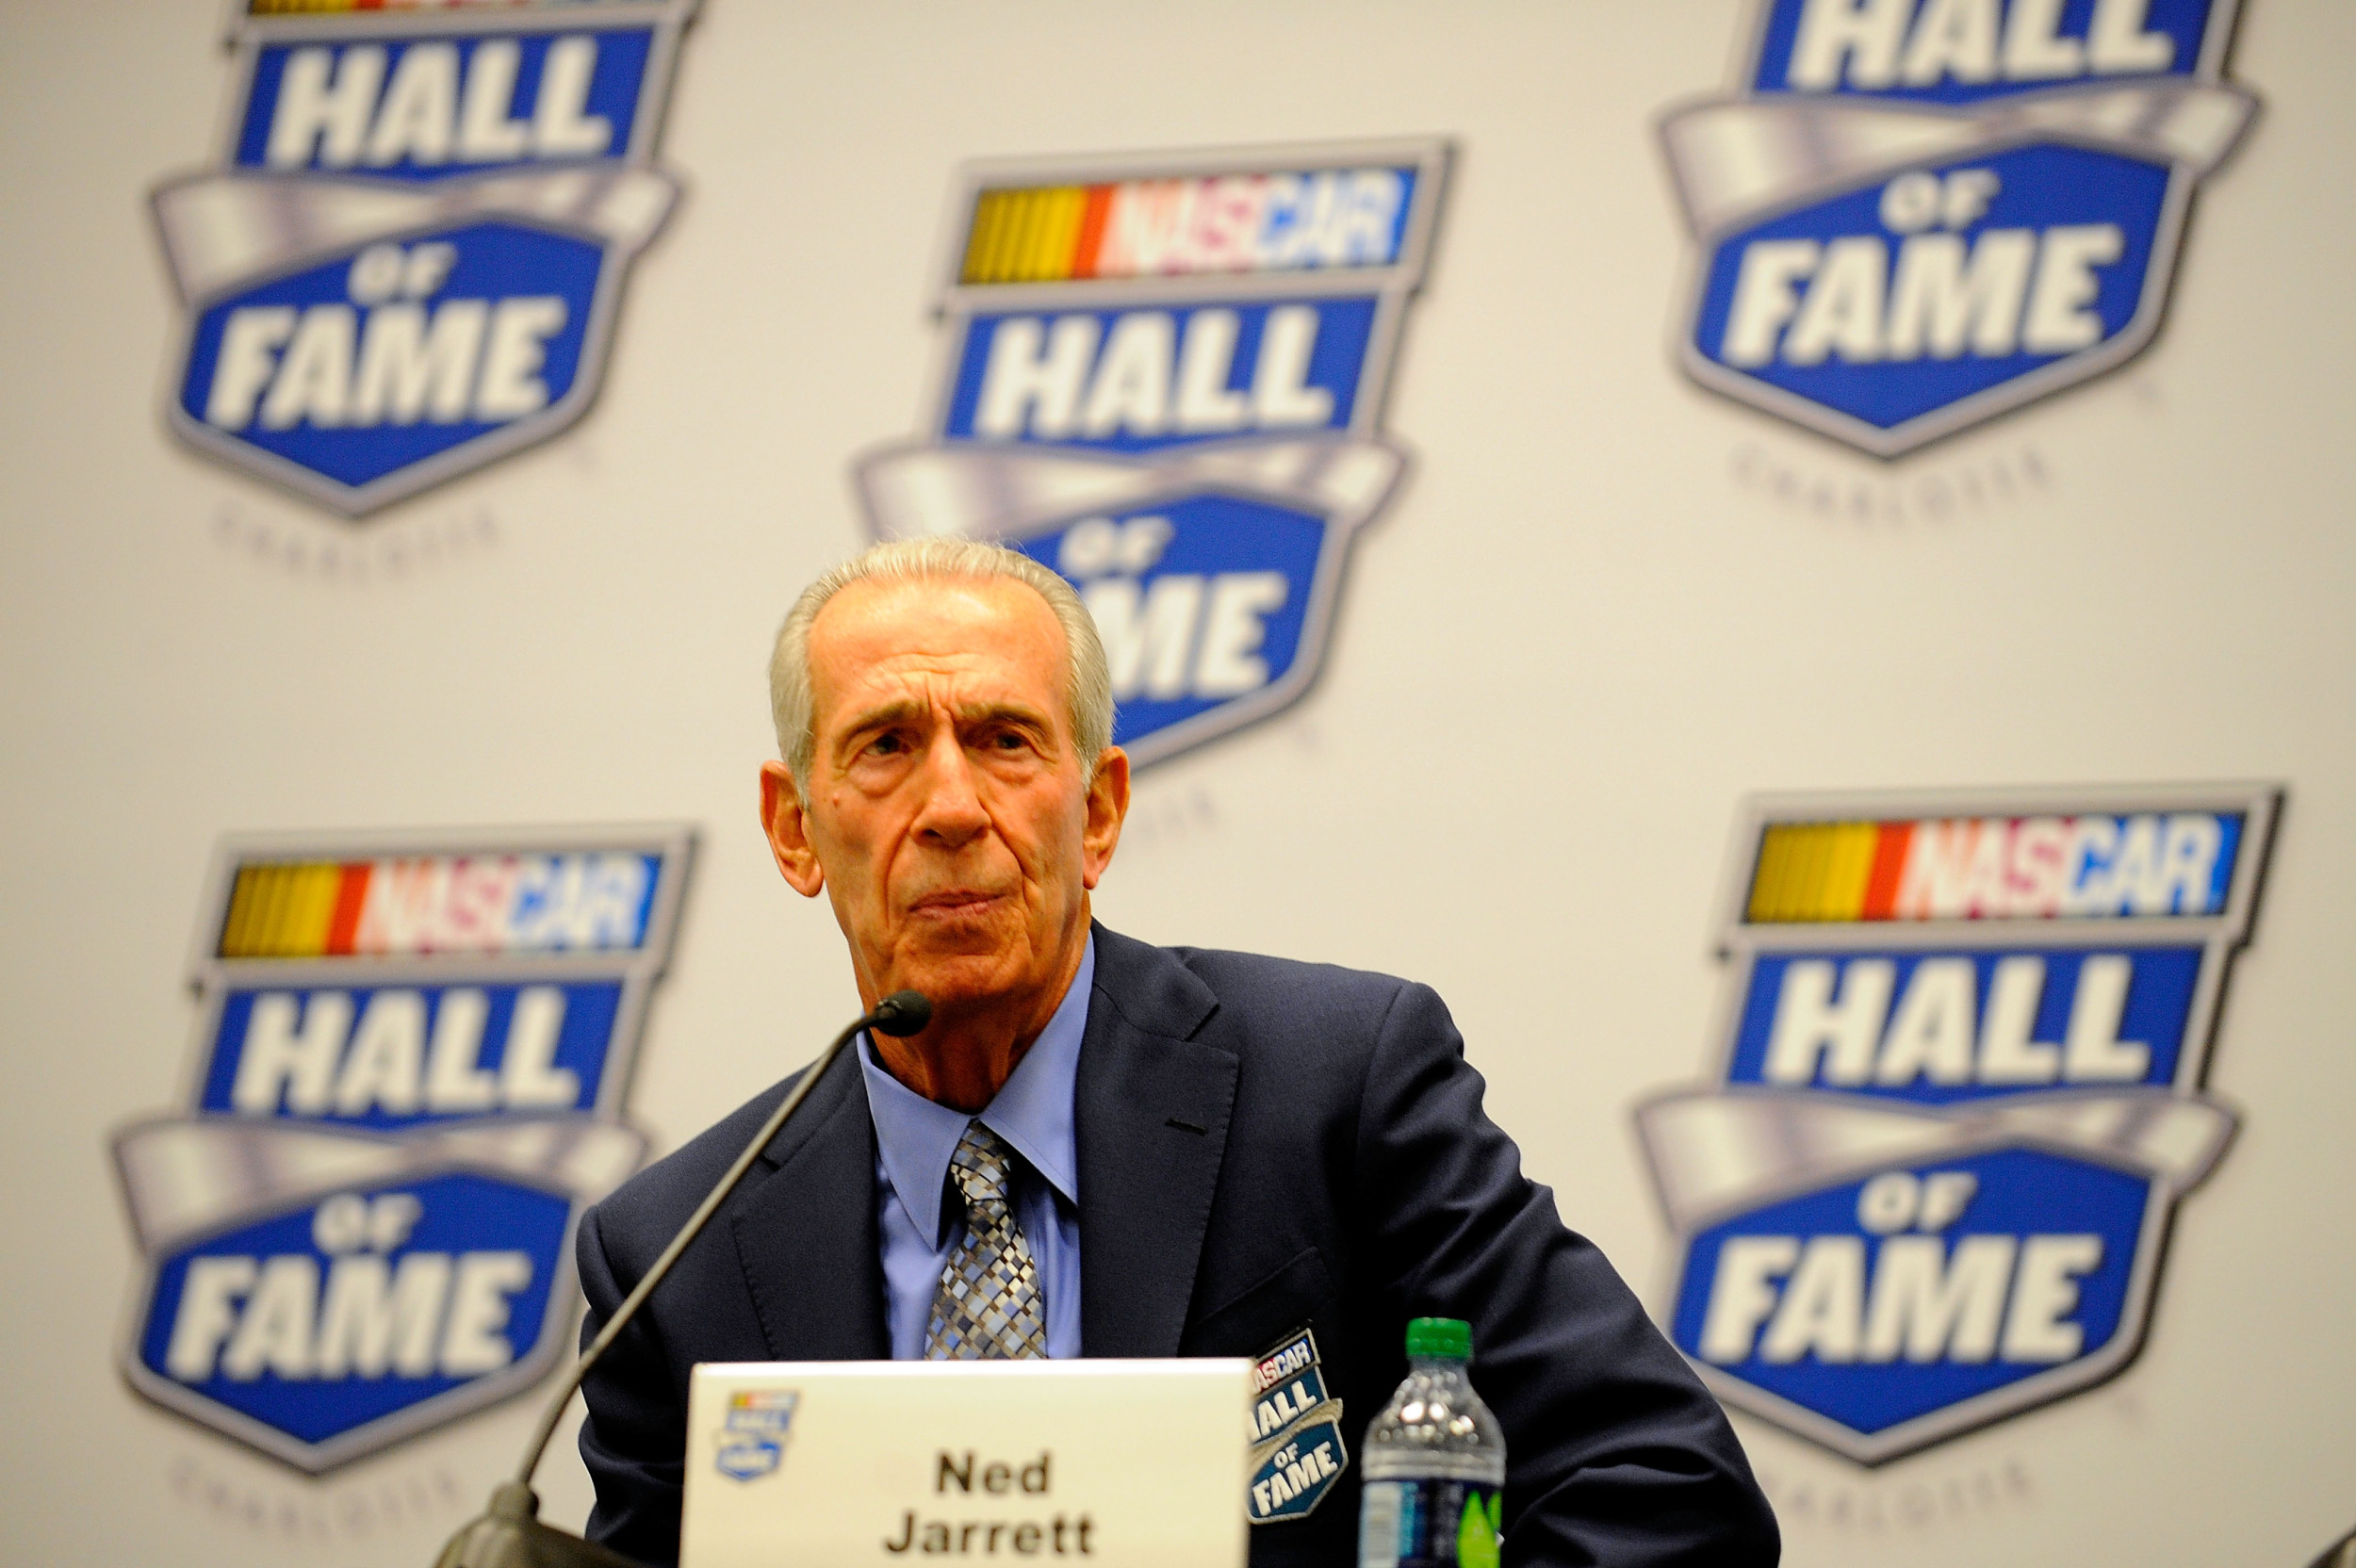 NASCAR News: Concerns about Ned Jarrett’s death – family speaks out